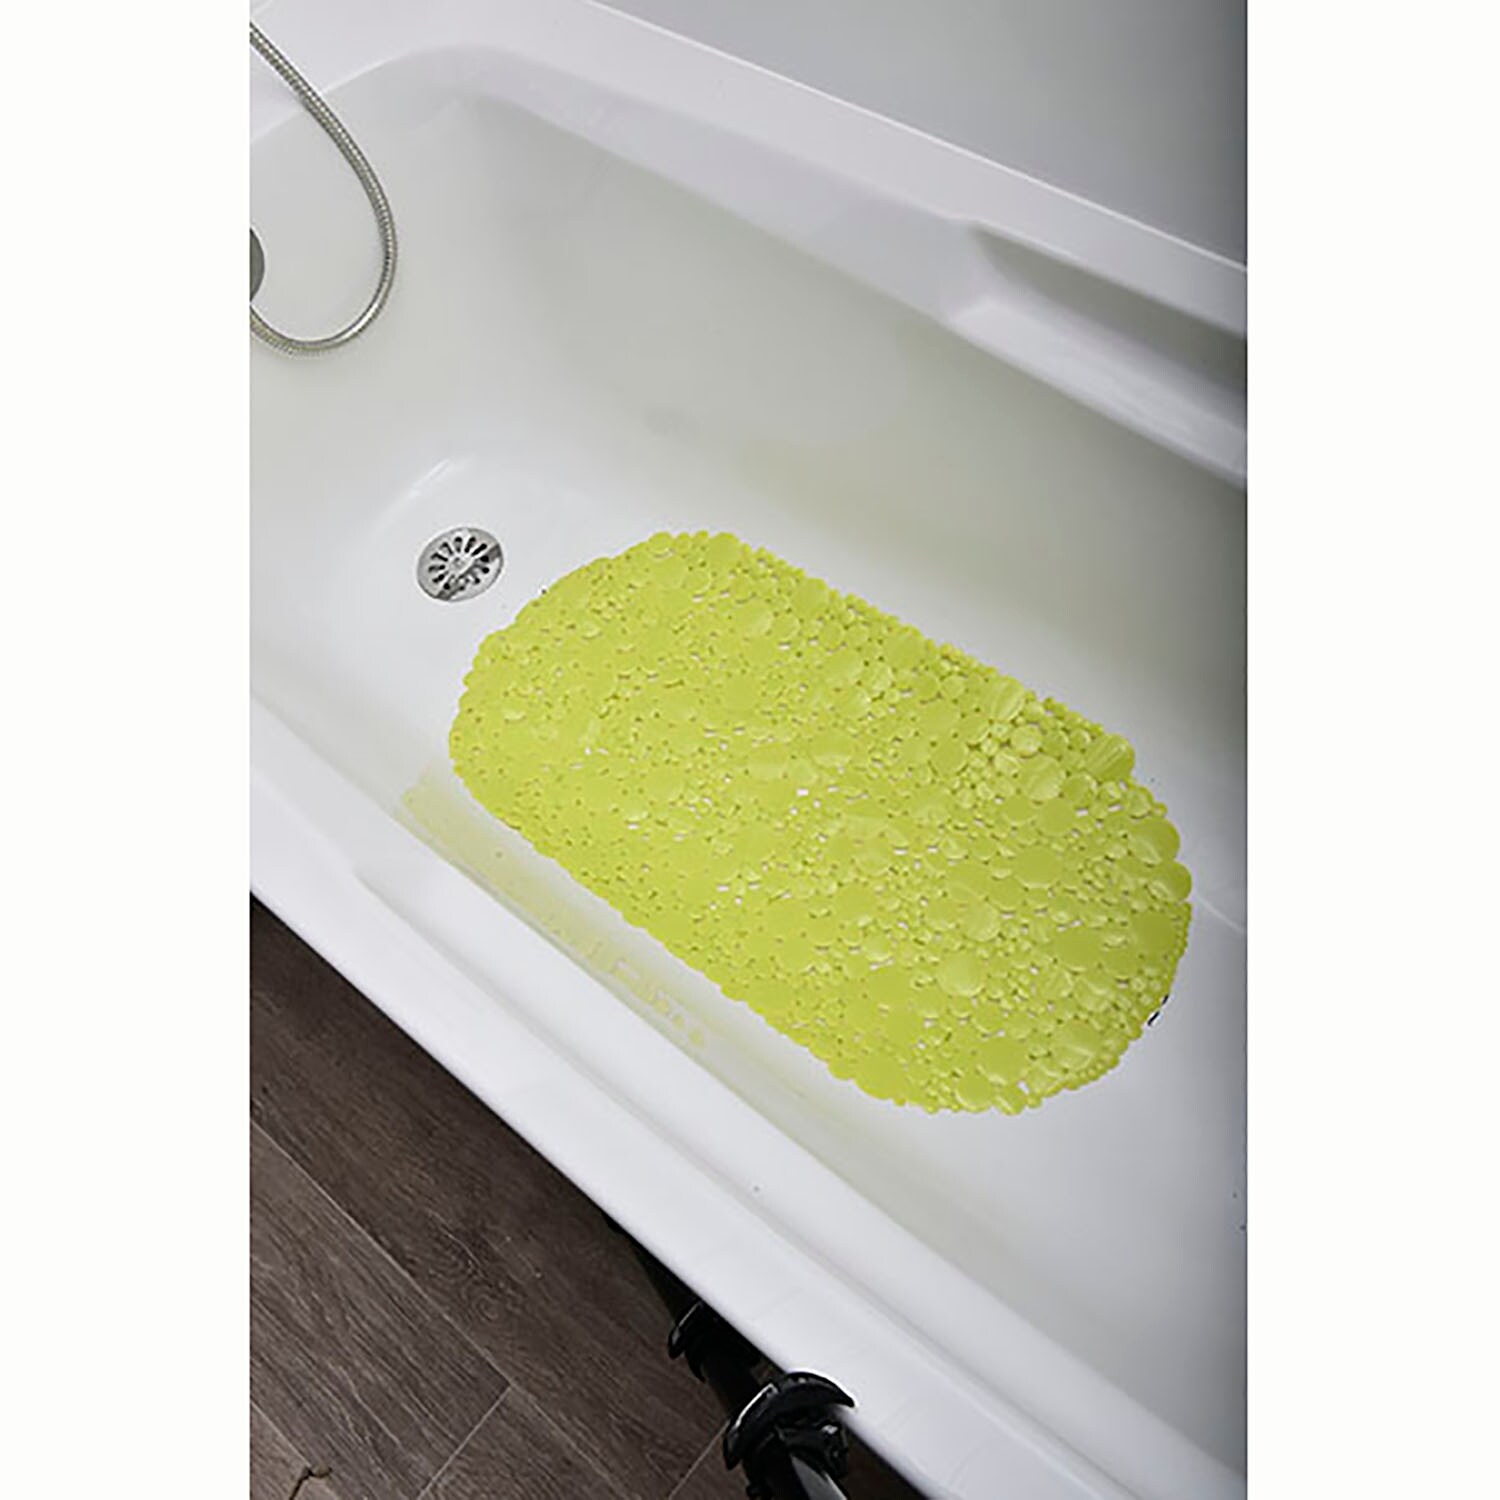 https://ak1.ostkcdn.com/images/products/is/images/direct/5e9bb6a10574446c6da0dc973ce506e5d9fcf5e3/Bathtub-Mat-Pebbles-Bubbles-Non-Skid-28%22L-x-15%22W.jpg